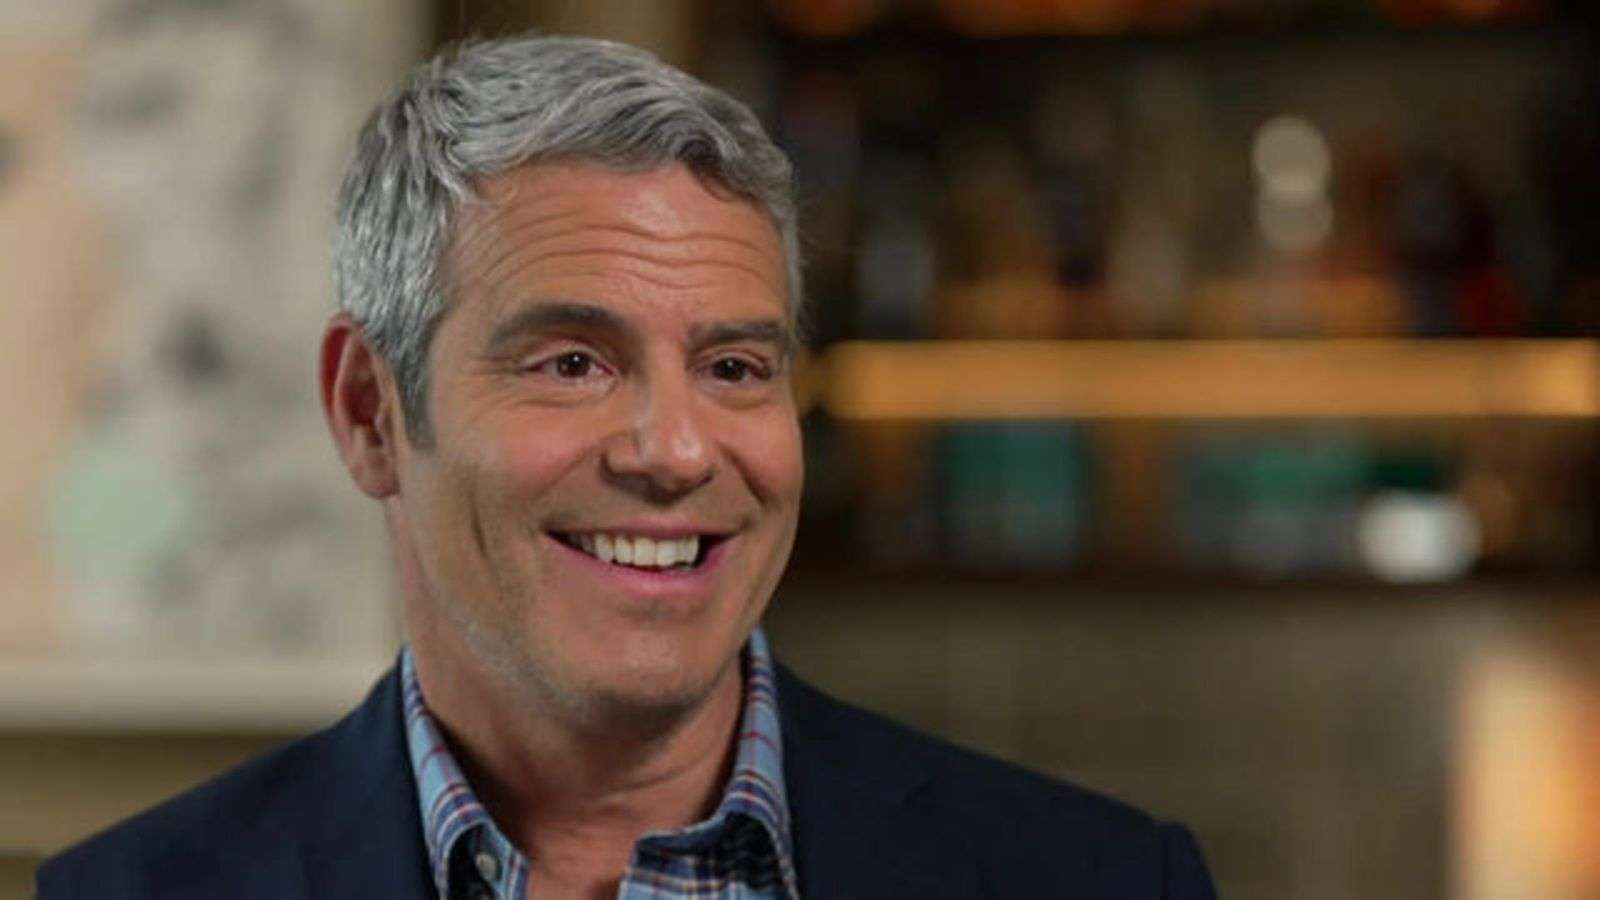 andy cohen at CBS Sunday Morning show